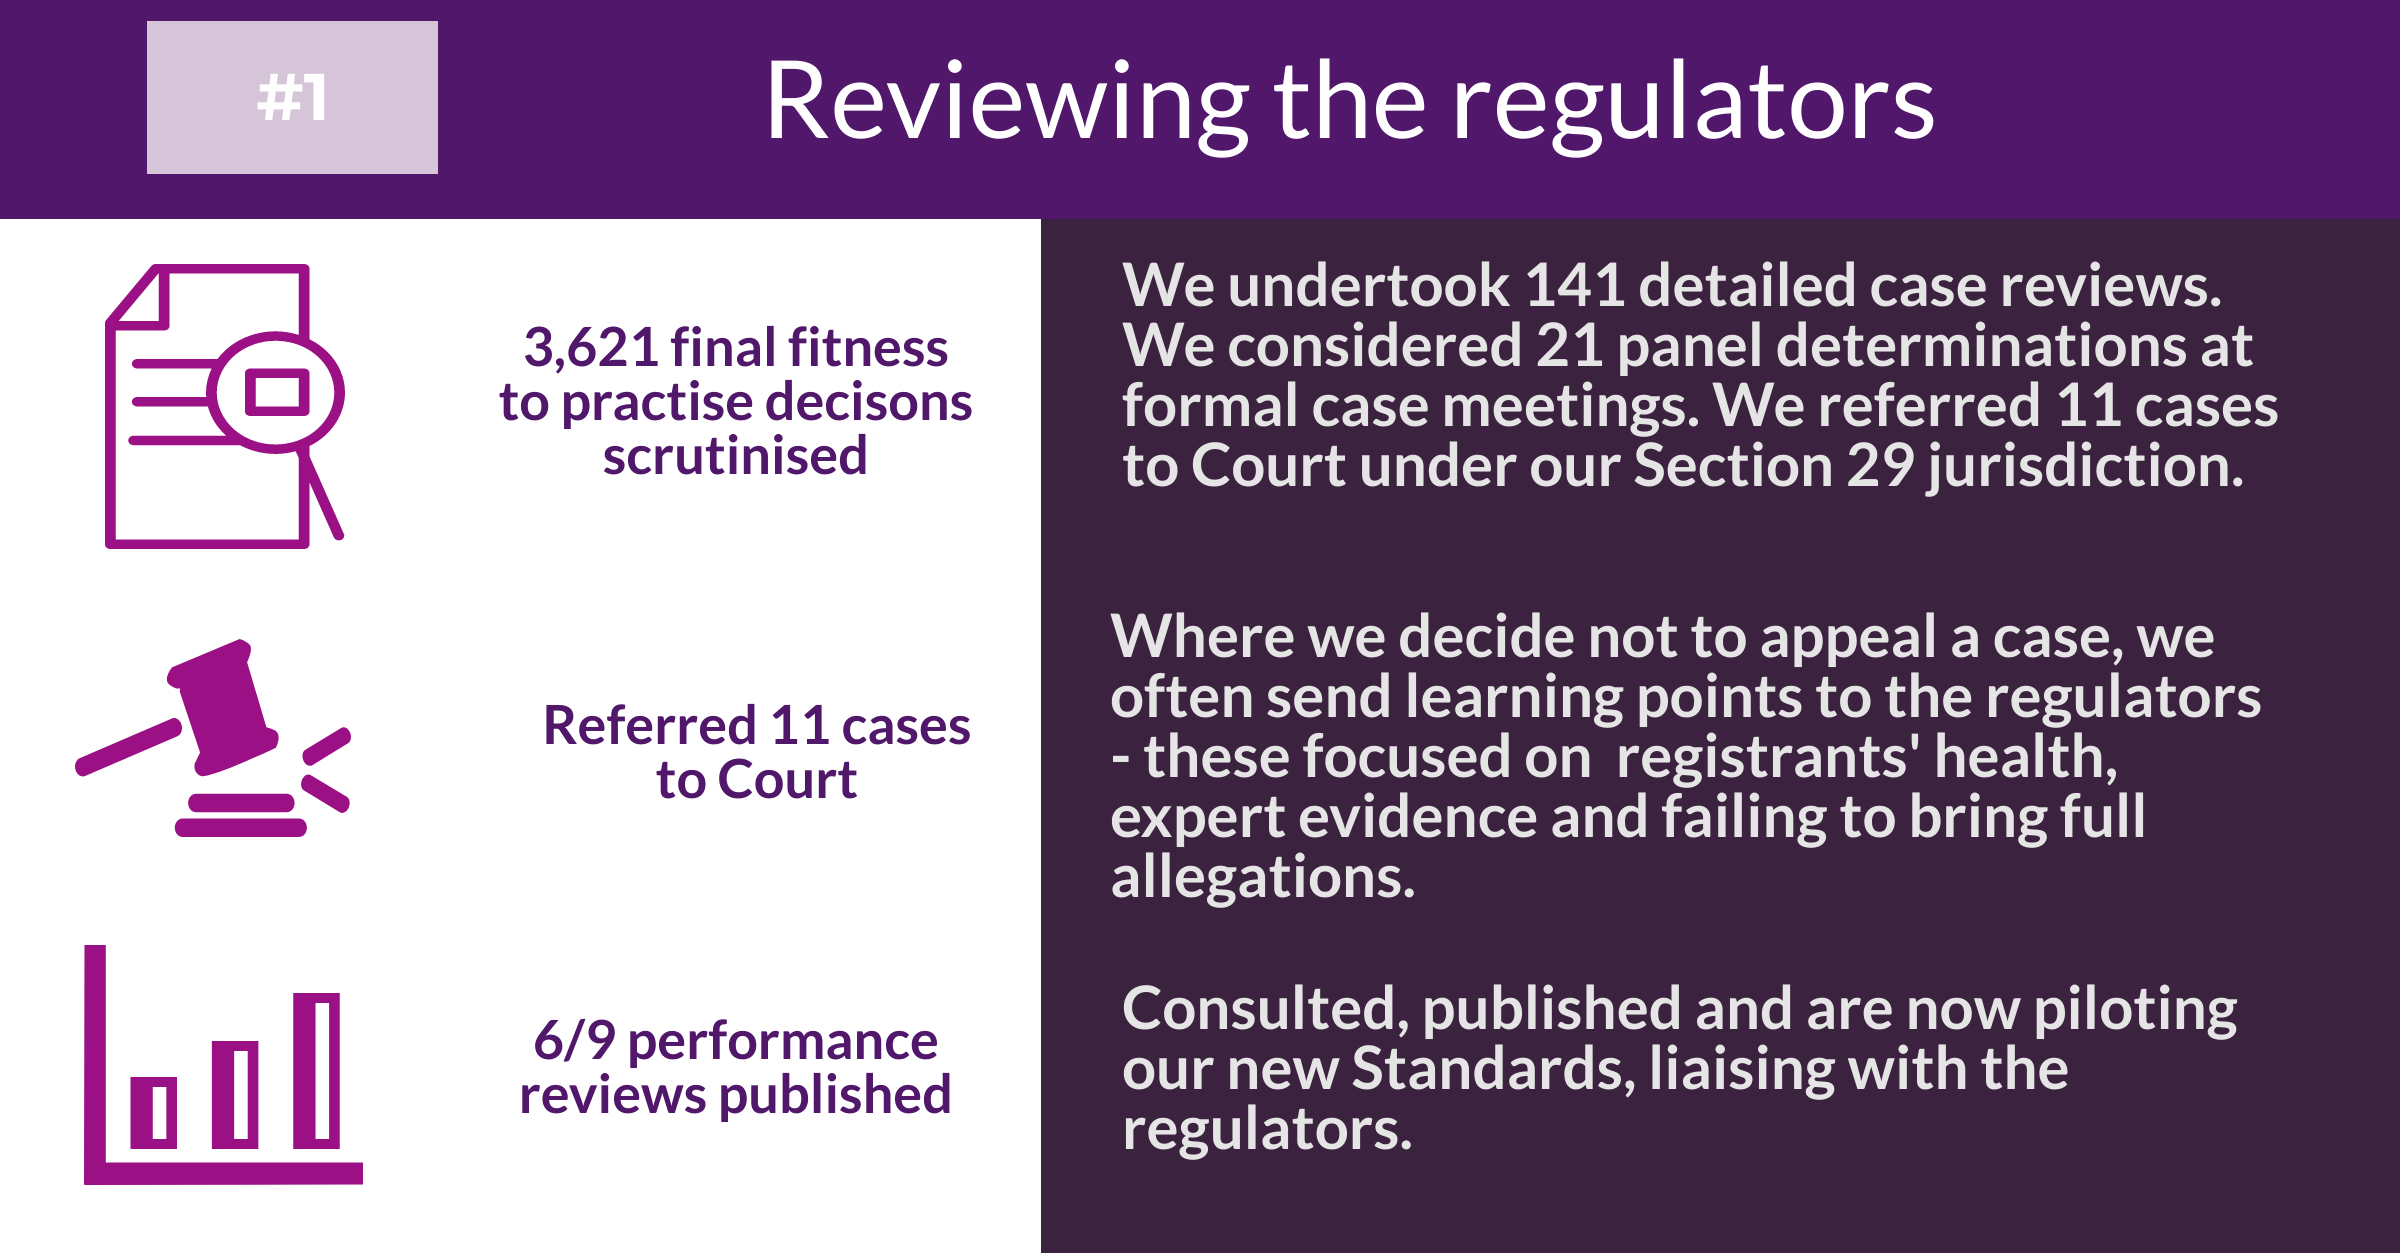 Annual report highlights 2018/19 - reviewing the regulators